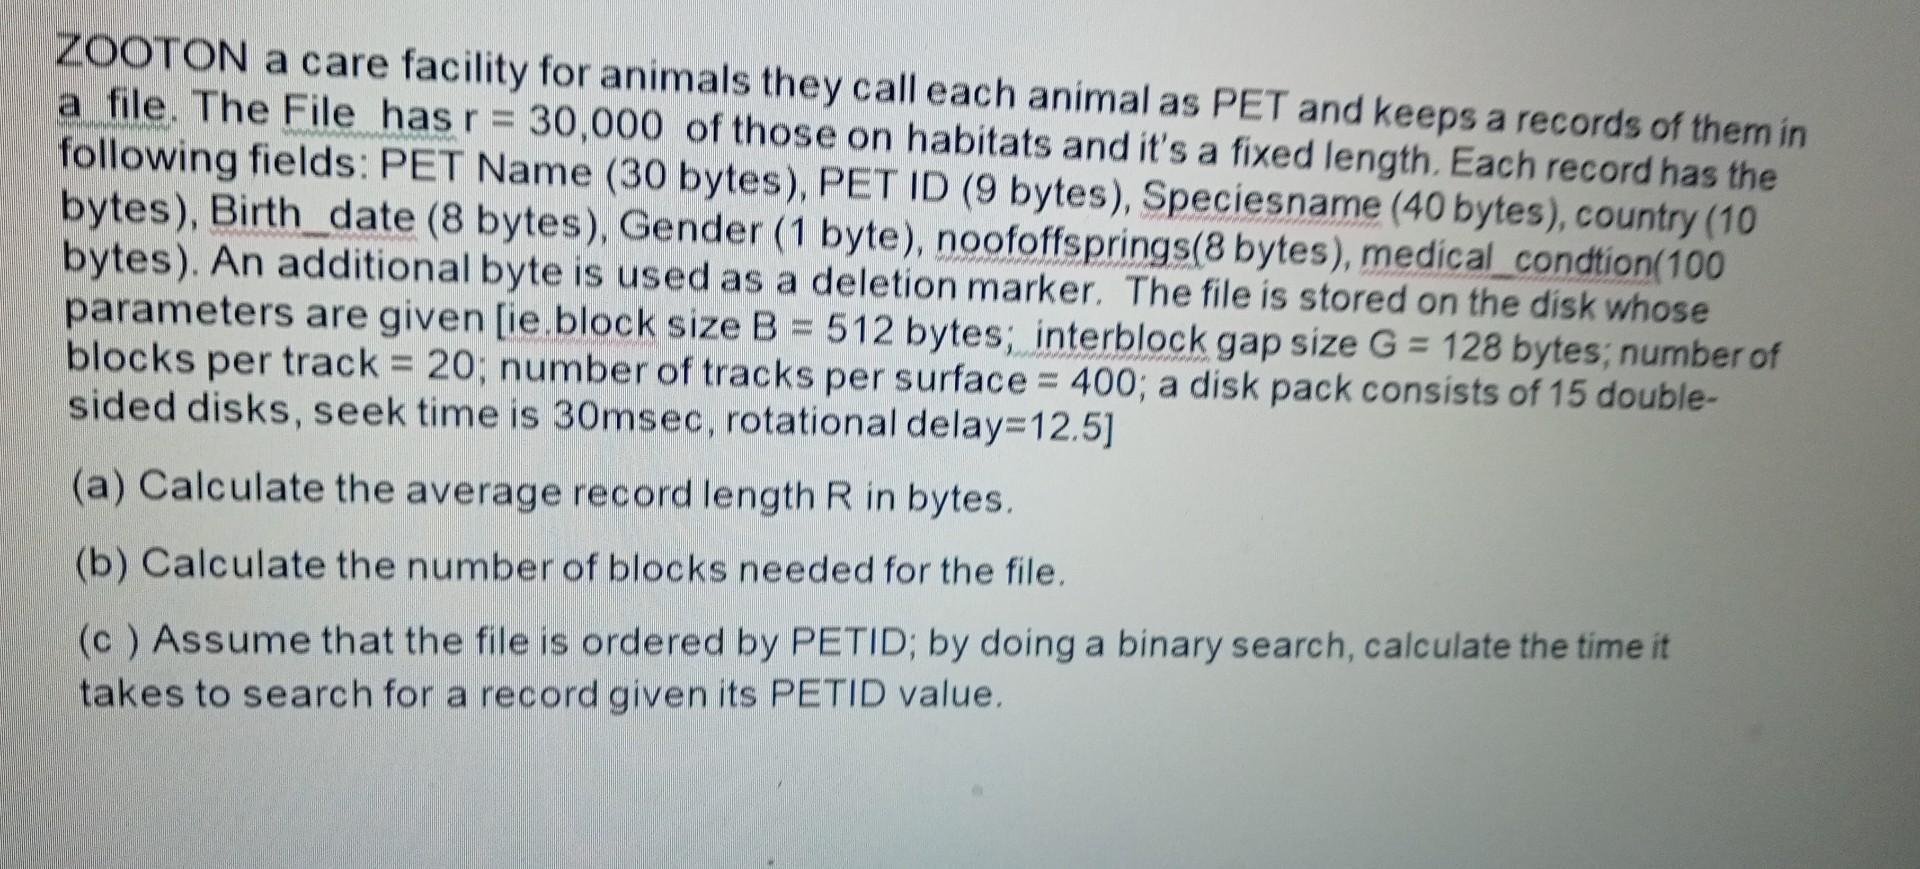 ZOOTON a care facility for animals they call each animal as PET and keeps a records of them in a file. The